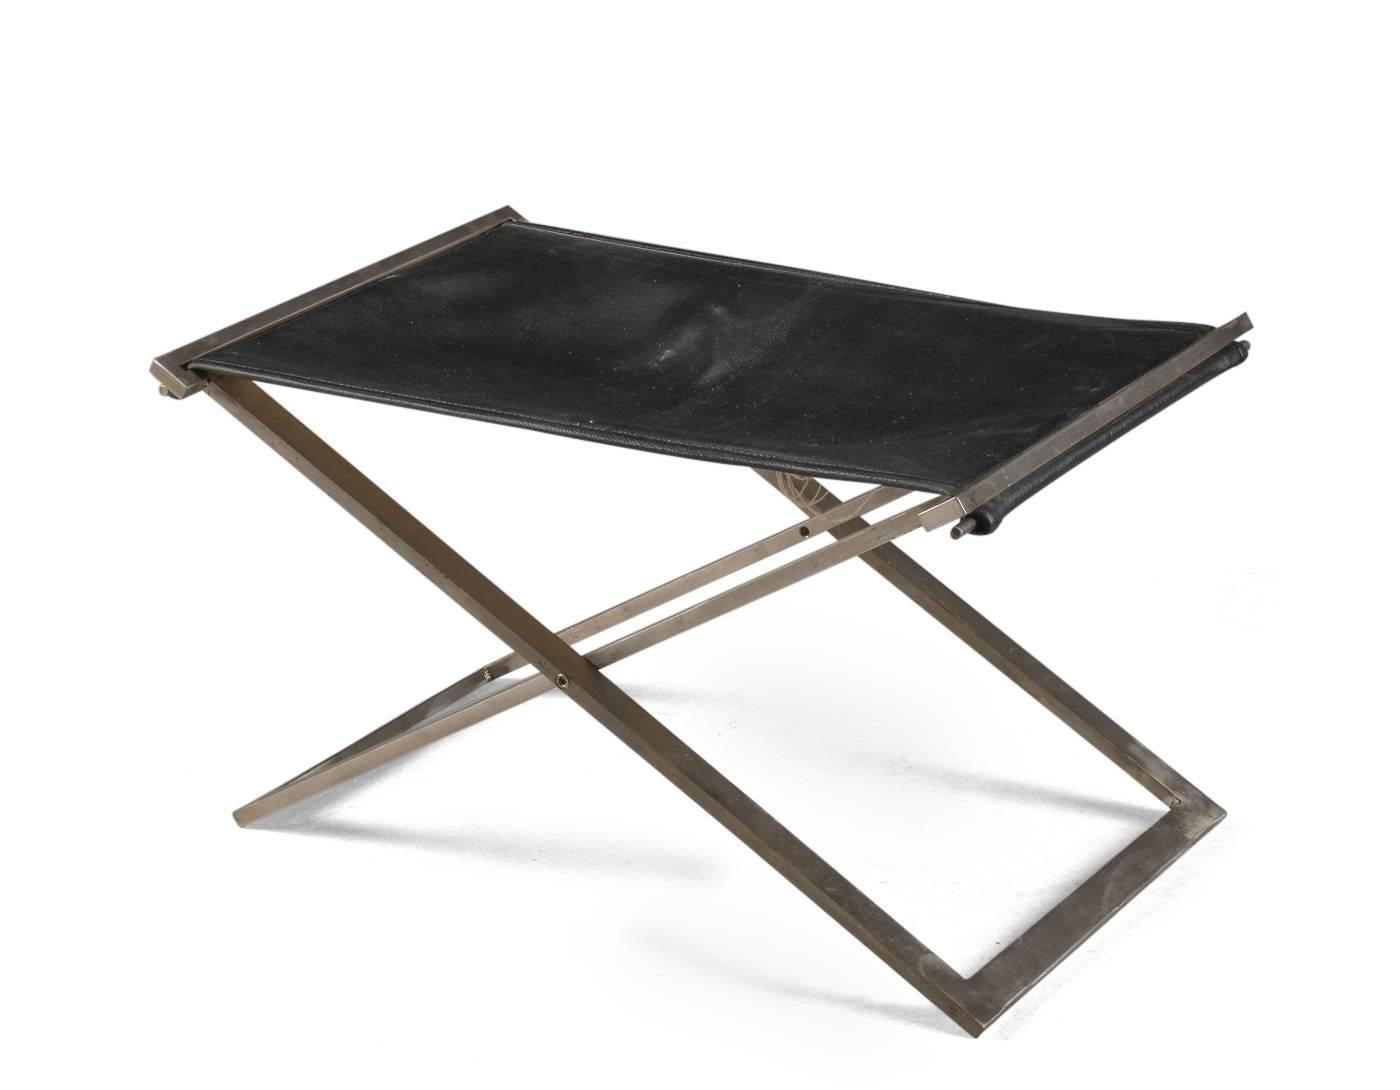 Michael Christensen foldable stool, model Rough # 1 with 10 mm hand-painted flat steel frame, stretched seat with black semianiline leather with light canvas backing. Measures: H. 36. L. 60. B. 40 cm. Wear marks on the underside of the leather, and